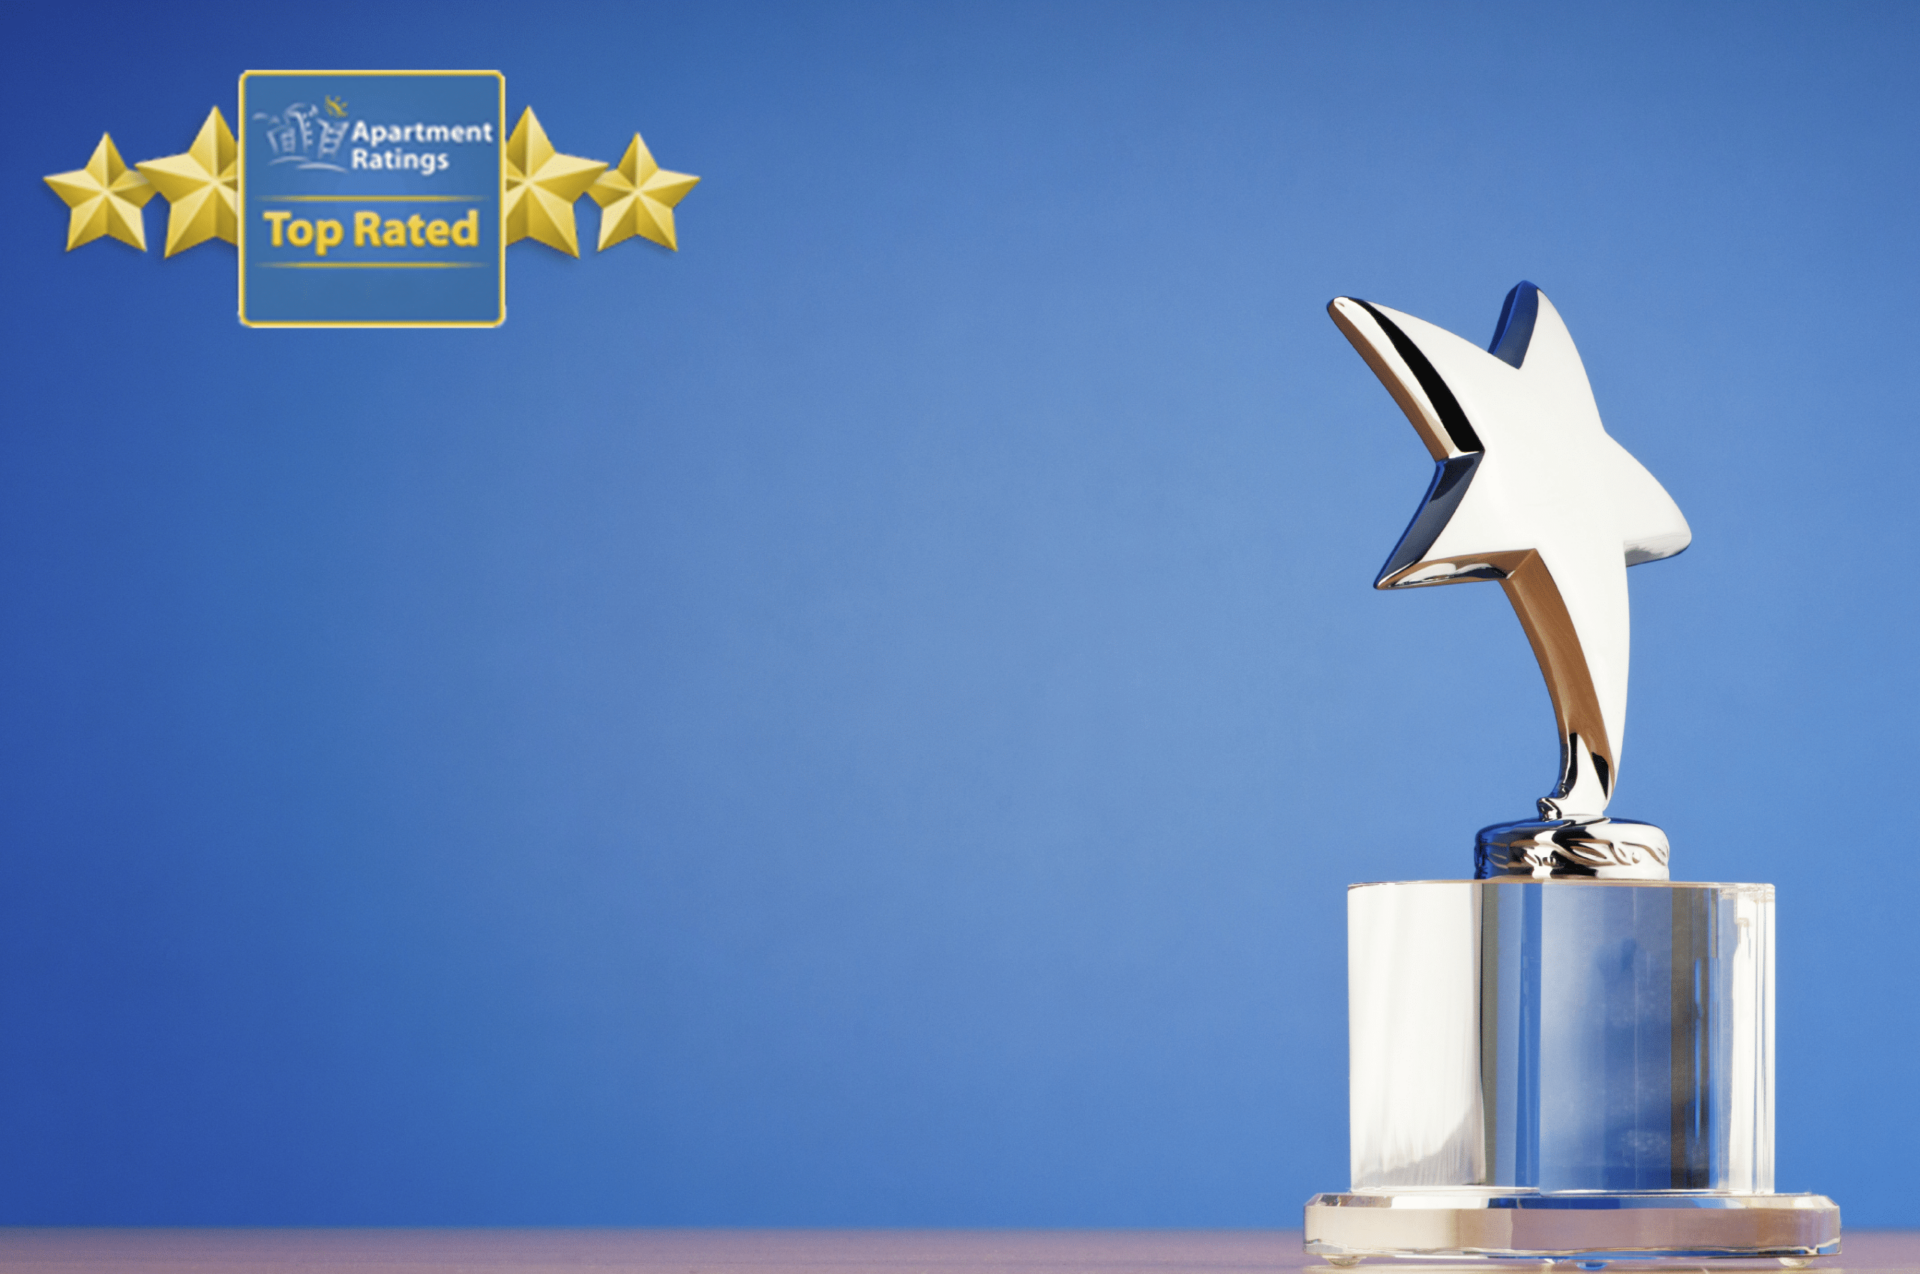 Three ResideBPG Properties Received An Award from ApartmentRatings.com!